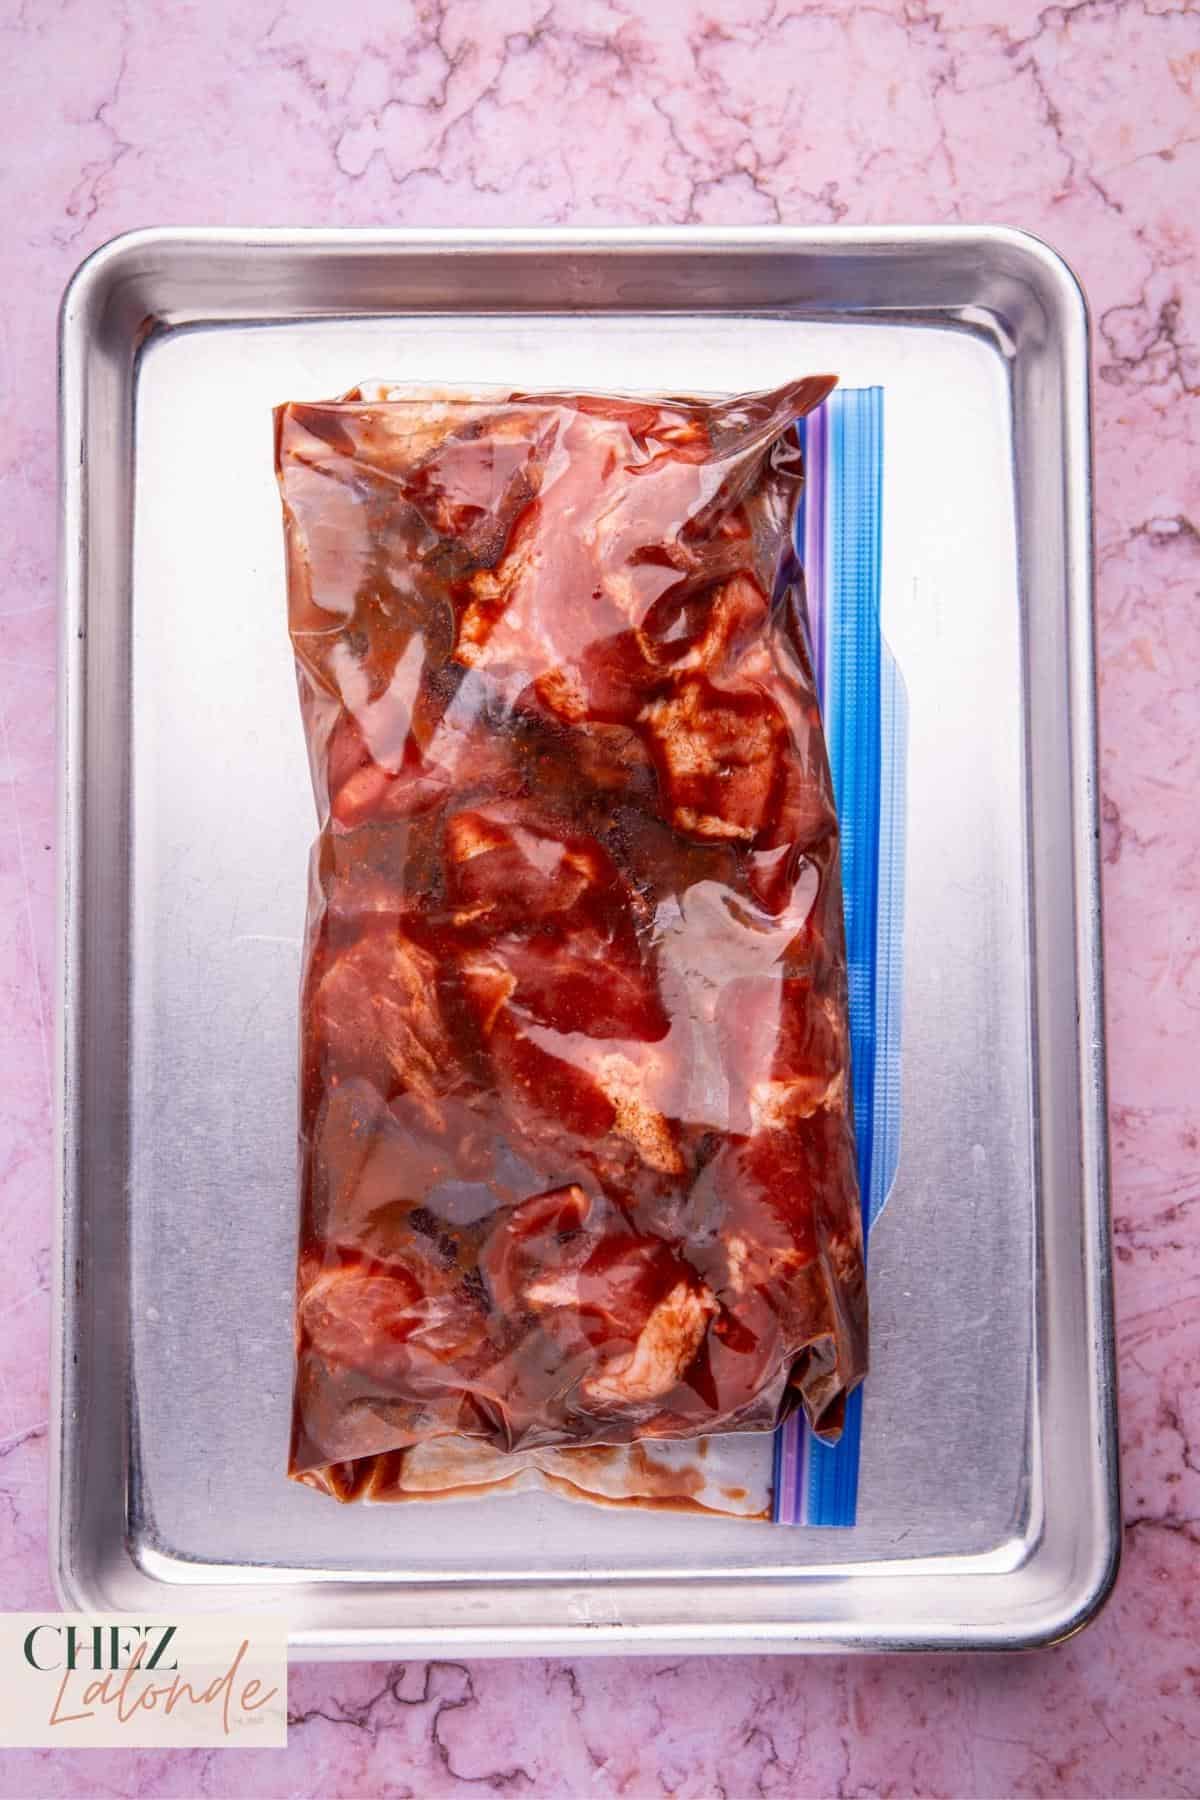 With the marinating process underway, transfer the bag to the refrigerator, allowing the pork to soak in the flavors for at least one hour. For intensified taste, feel free to let it marinate overnight.